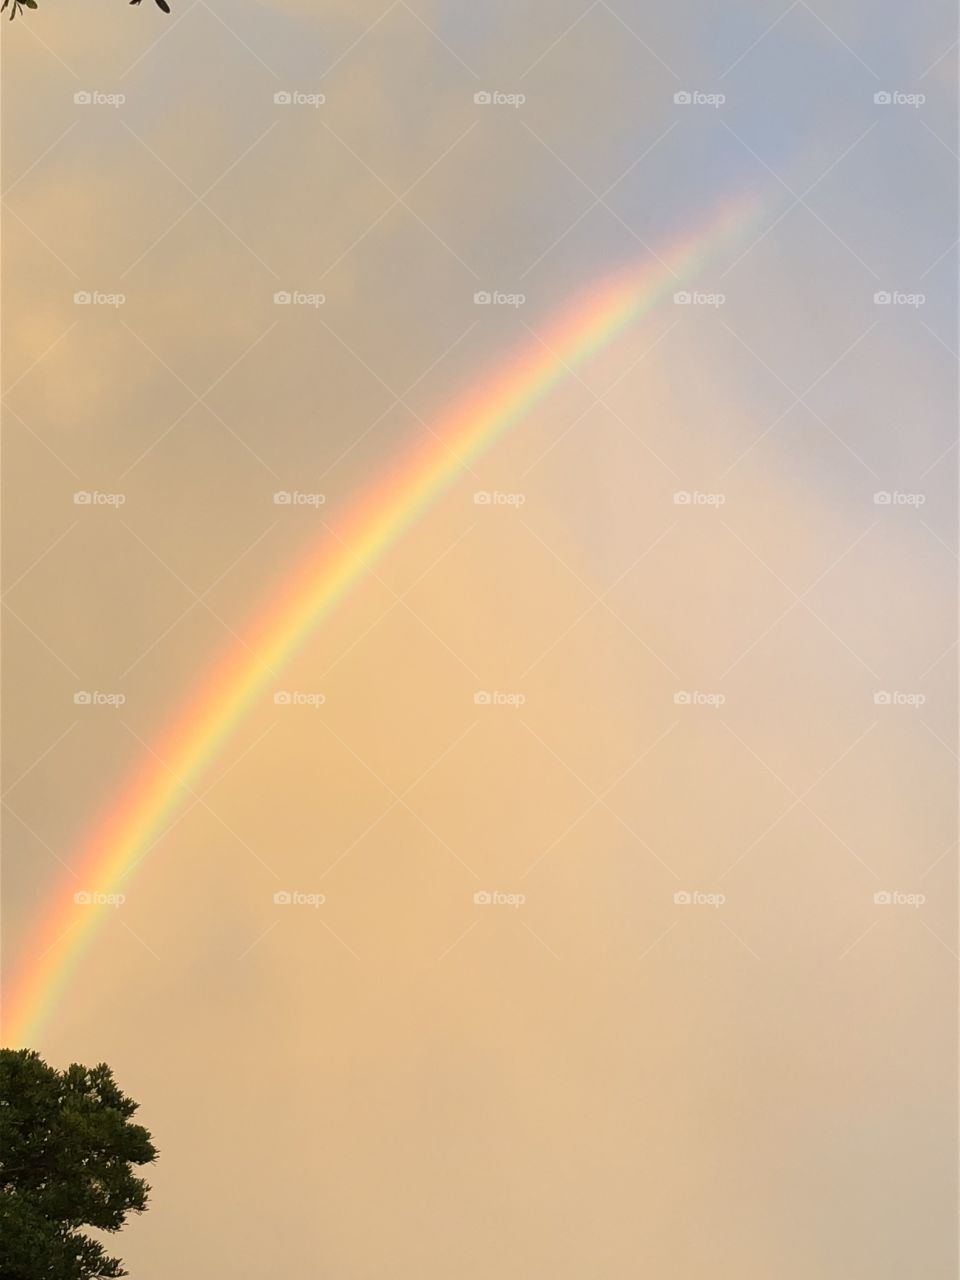 A colorful rainbow appears after an afternoon summer thunderstorm in Florida, USA! 